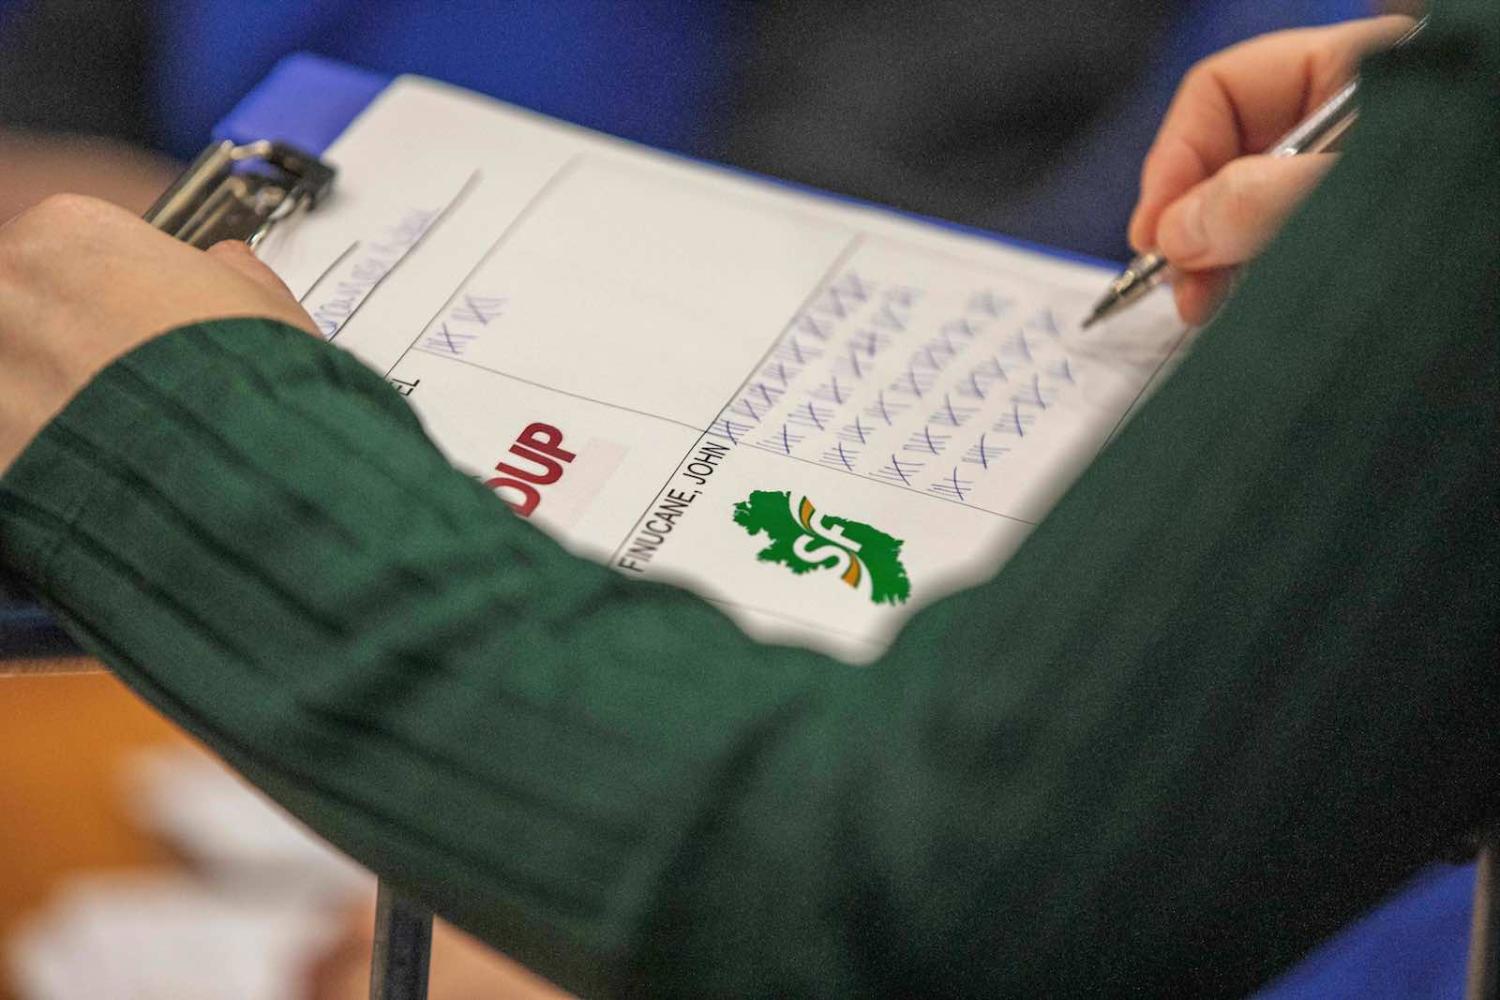 Tallying the votes in the UK election (Photo: Photo by Paul Faith/AFP/Getty Images)